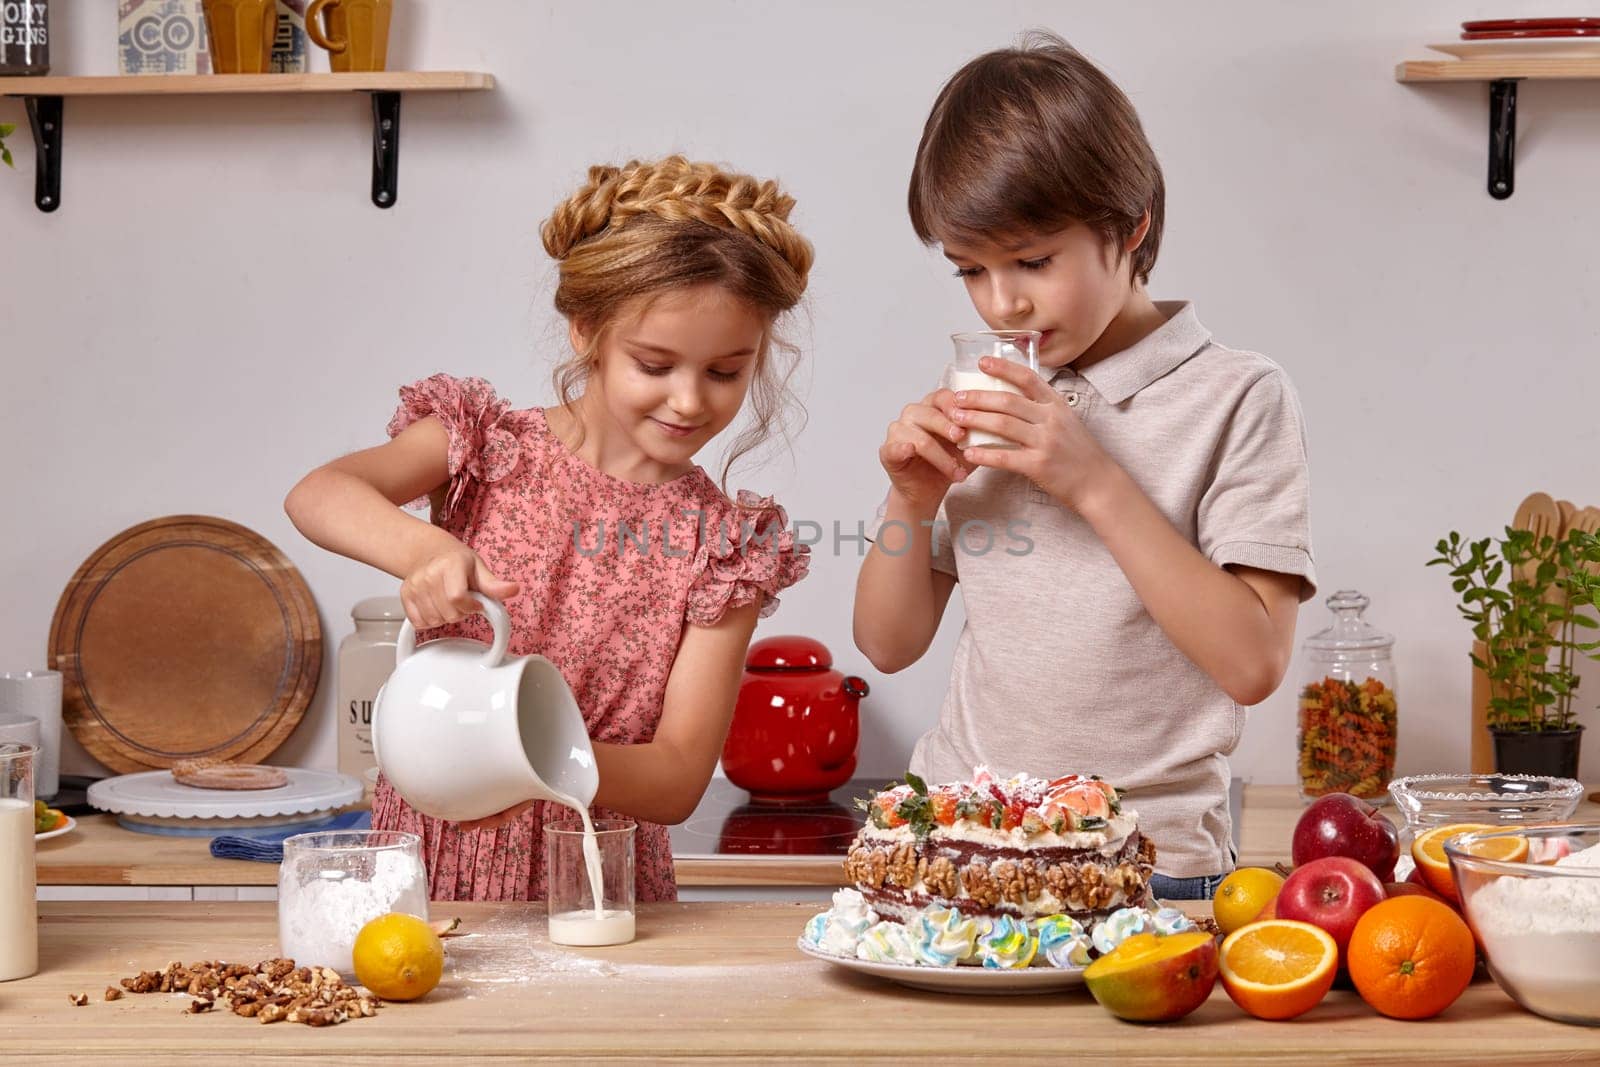 Brunette boy dressed in a light t-shirt and jeans and a beautiful girl wearing in a pink dress are making a cake at a kitchen, against a white wall with shelves on it. Girl is pouring some milk in a glass and boy is drinking his milk.